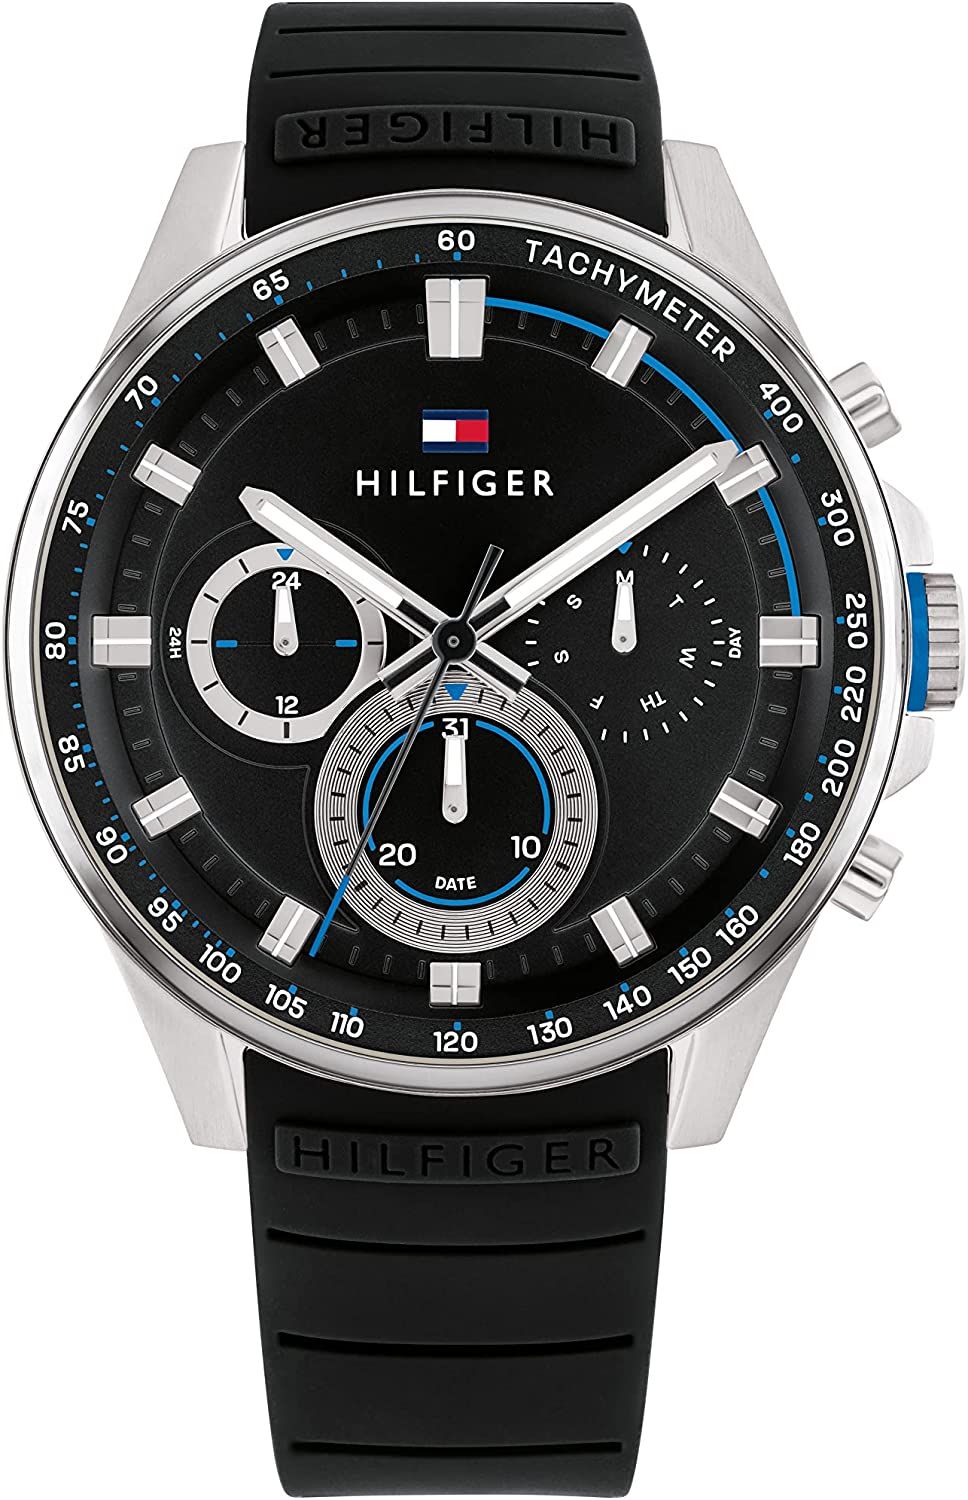 This Tommy Hilfiger Max Multi Dial Watch for Men is the perfect timepiece to wear or to gift. It's Silver 45 mm Round case combined with the comfortable Black Silicone watch band will ensure you enjoy this stunning timepiece without any compromise. Operated by a high quality Quartz movement and water resistant to 5 bars, your watch will keep ticking. Thanks to its ultra-soft silicone strap and its iridescent dial, it will bring a fashionable and modern touch to all your outfits!The choice is yours! -The watch has a calendar function: Day-Date, 24-hour Display, Tachymeter High quality 21 cm length and 20 mm width Black Silicone strap with a Buckle Case diameter: 45 mm,case thickness: 10 mm, case colour: Silver and dial colour: Black